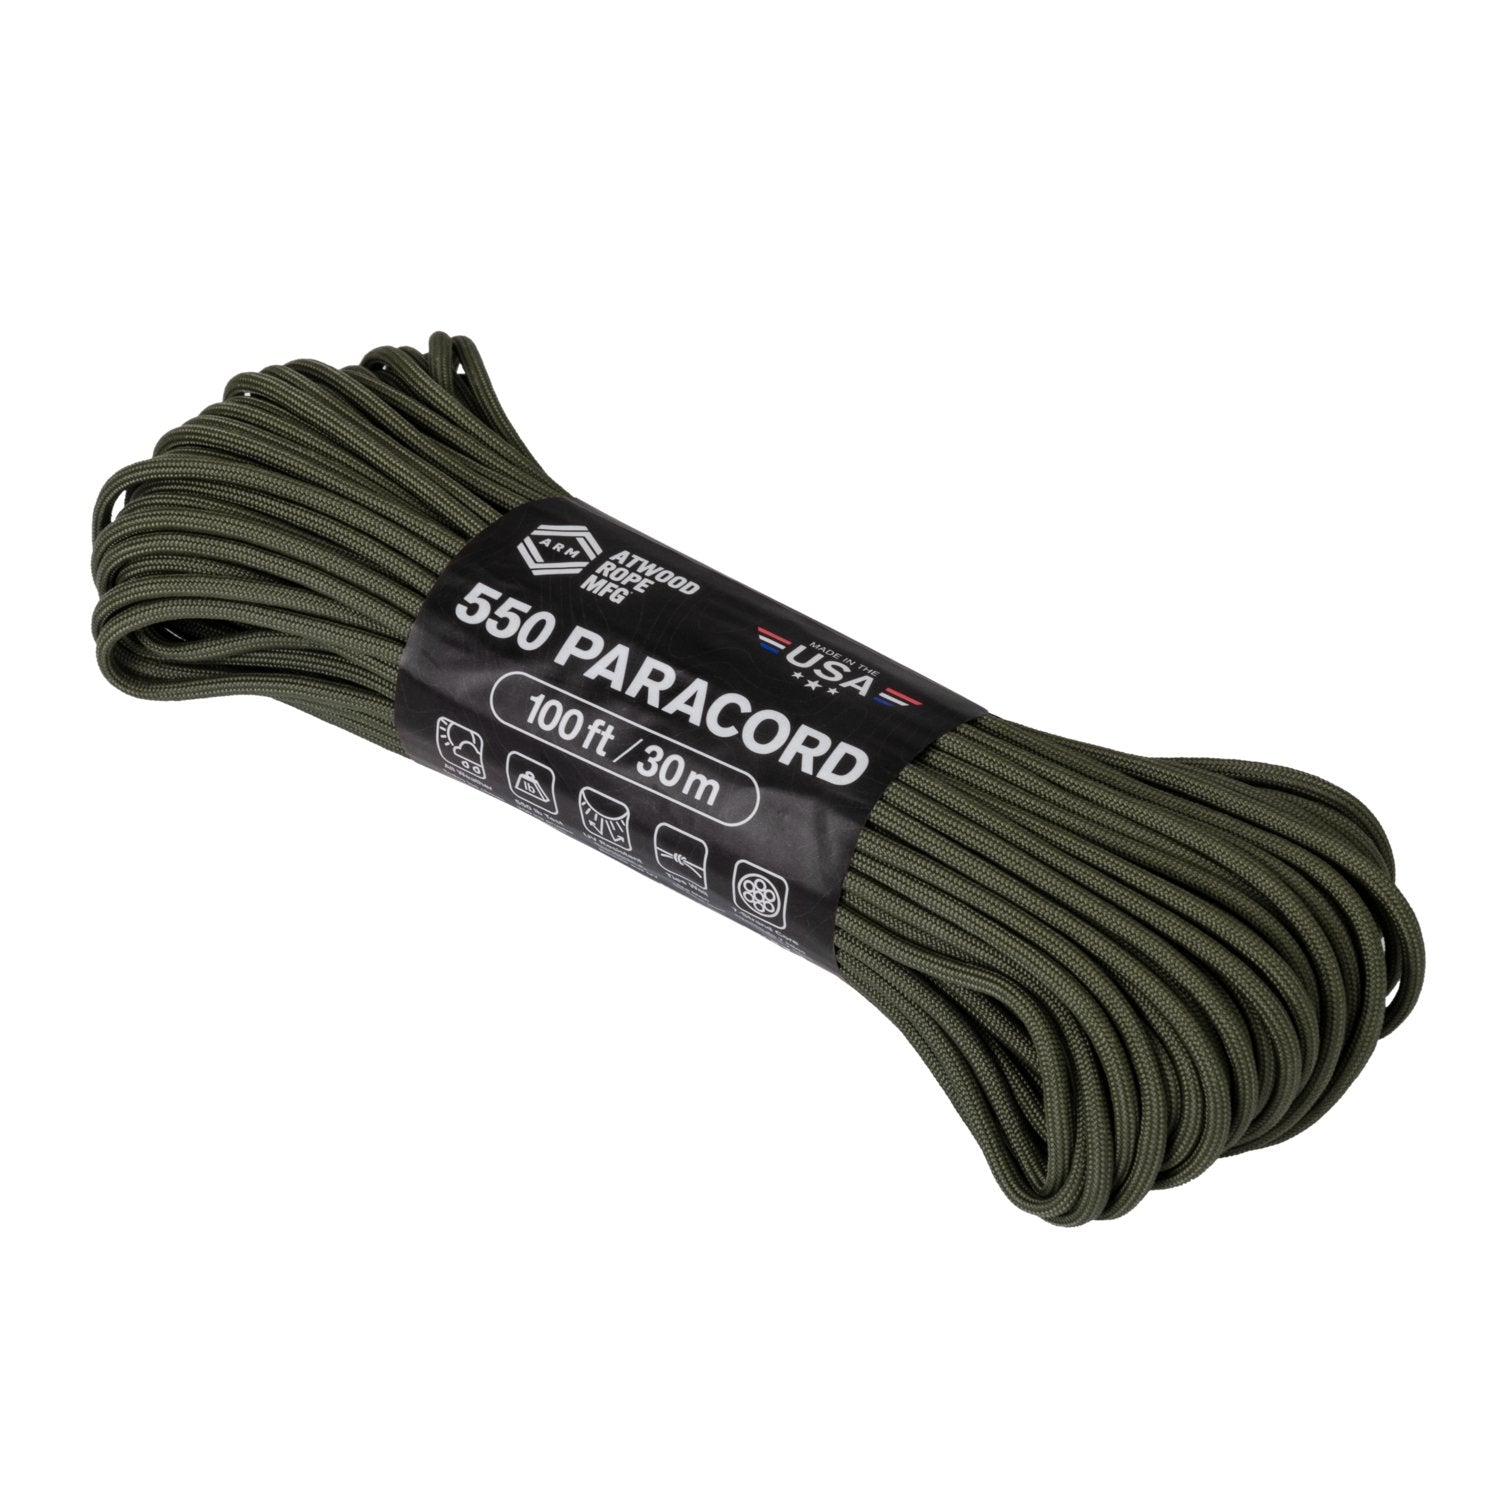 Atwood Rope MFG 550 Paracord (100ft)